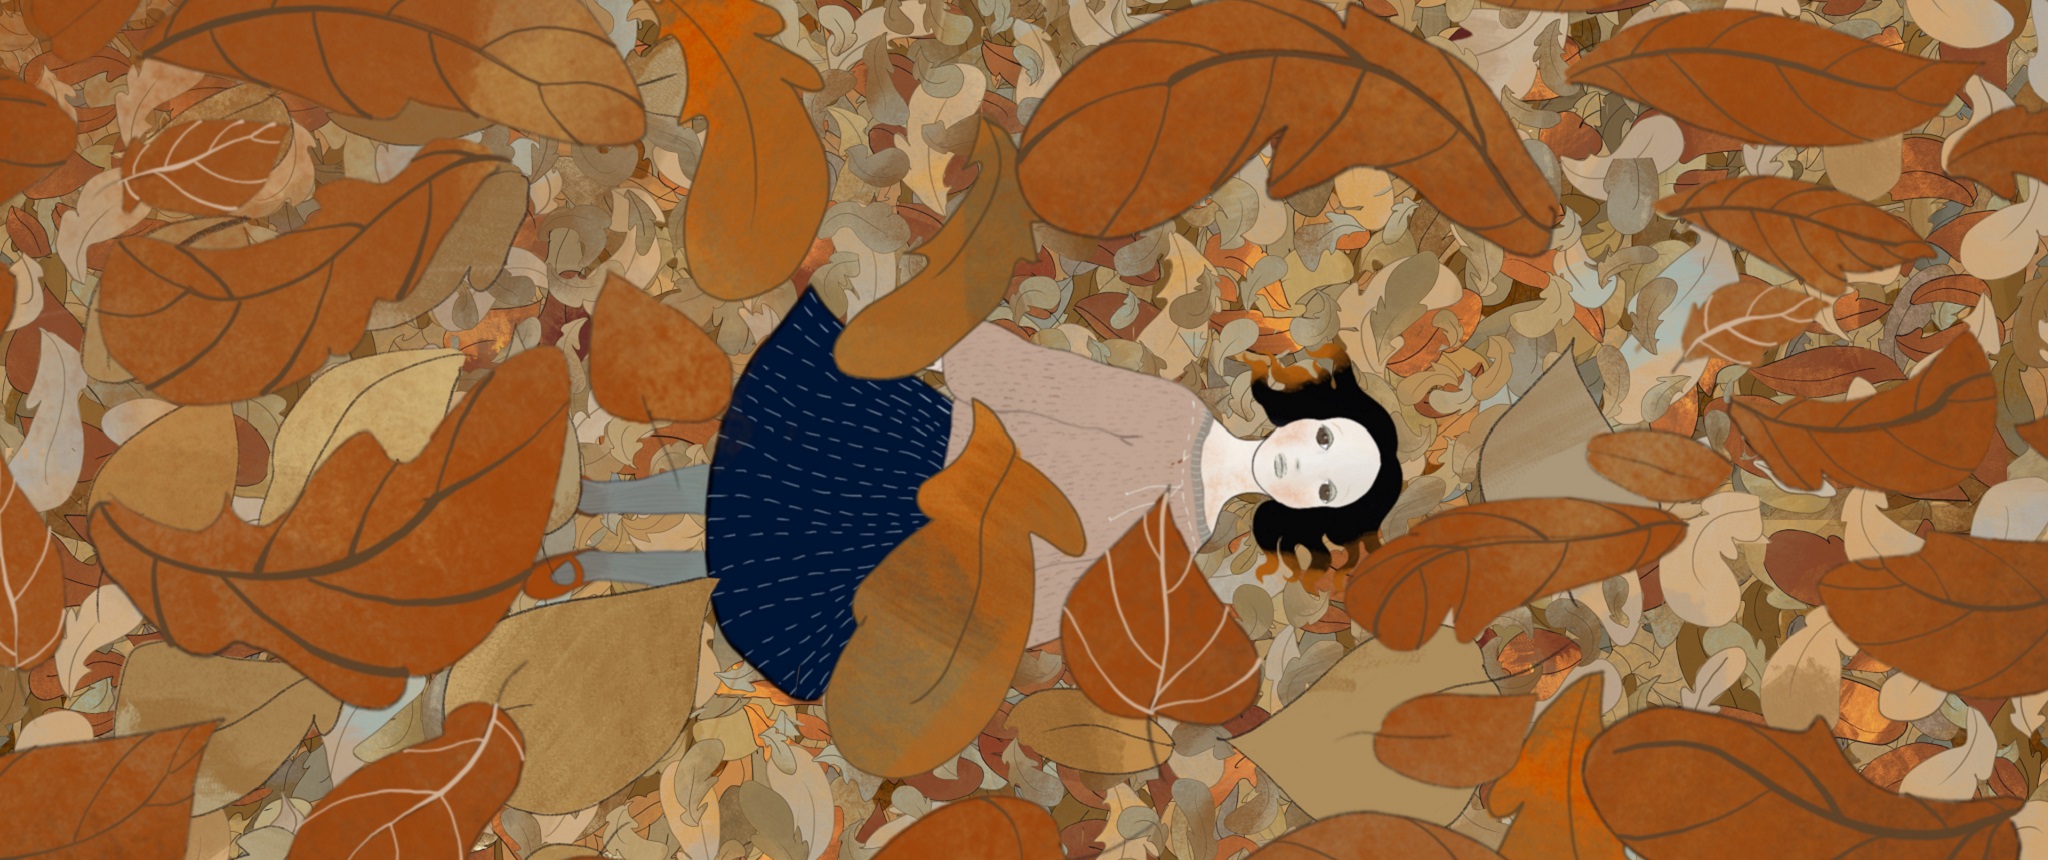 THE SONG OF FLYING LEAVES - STILL 2